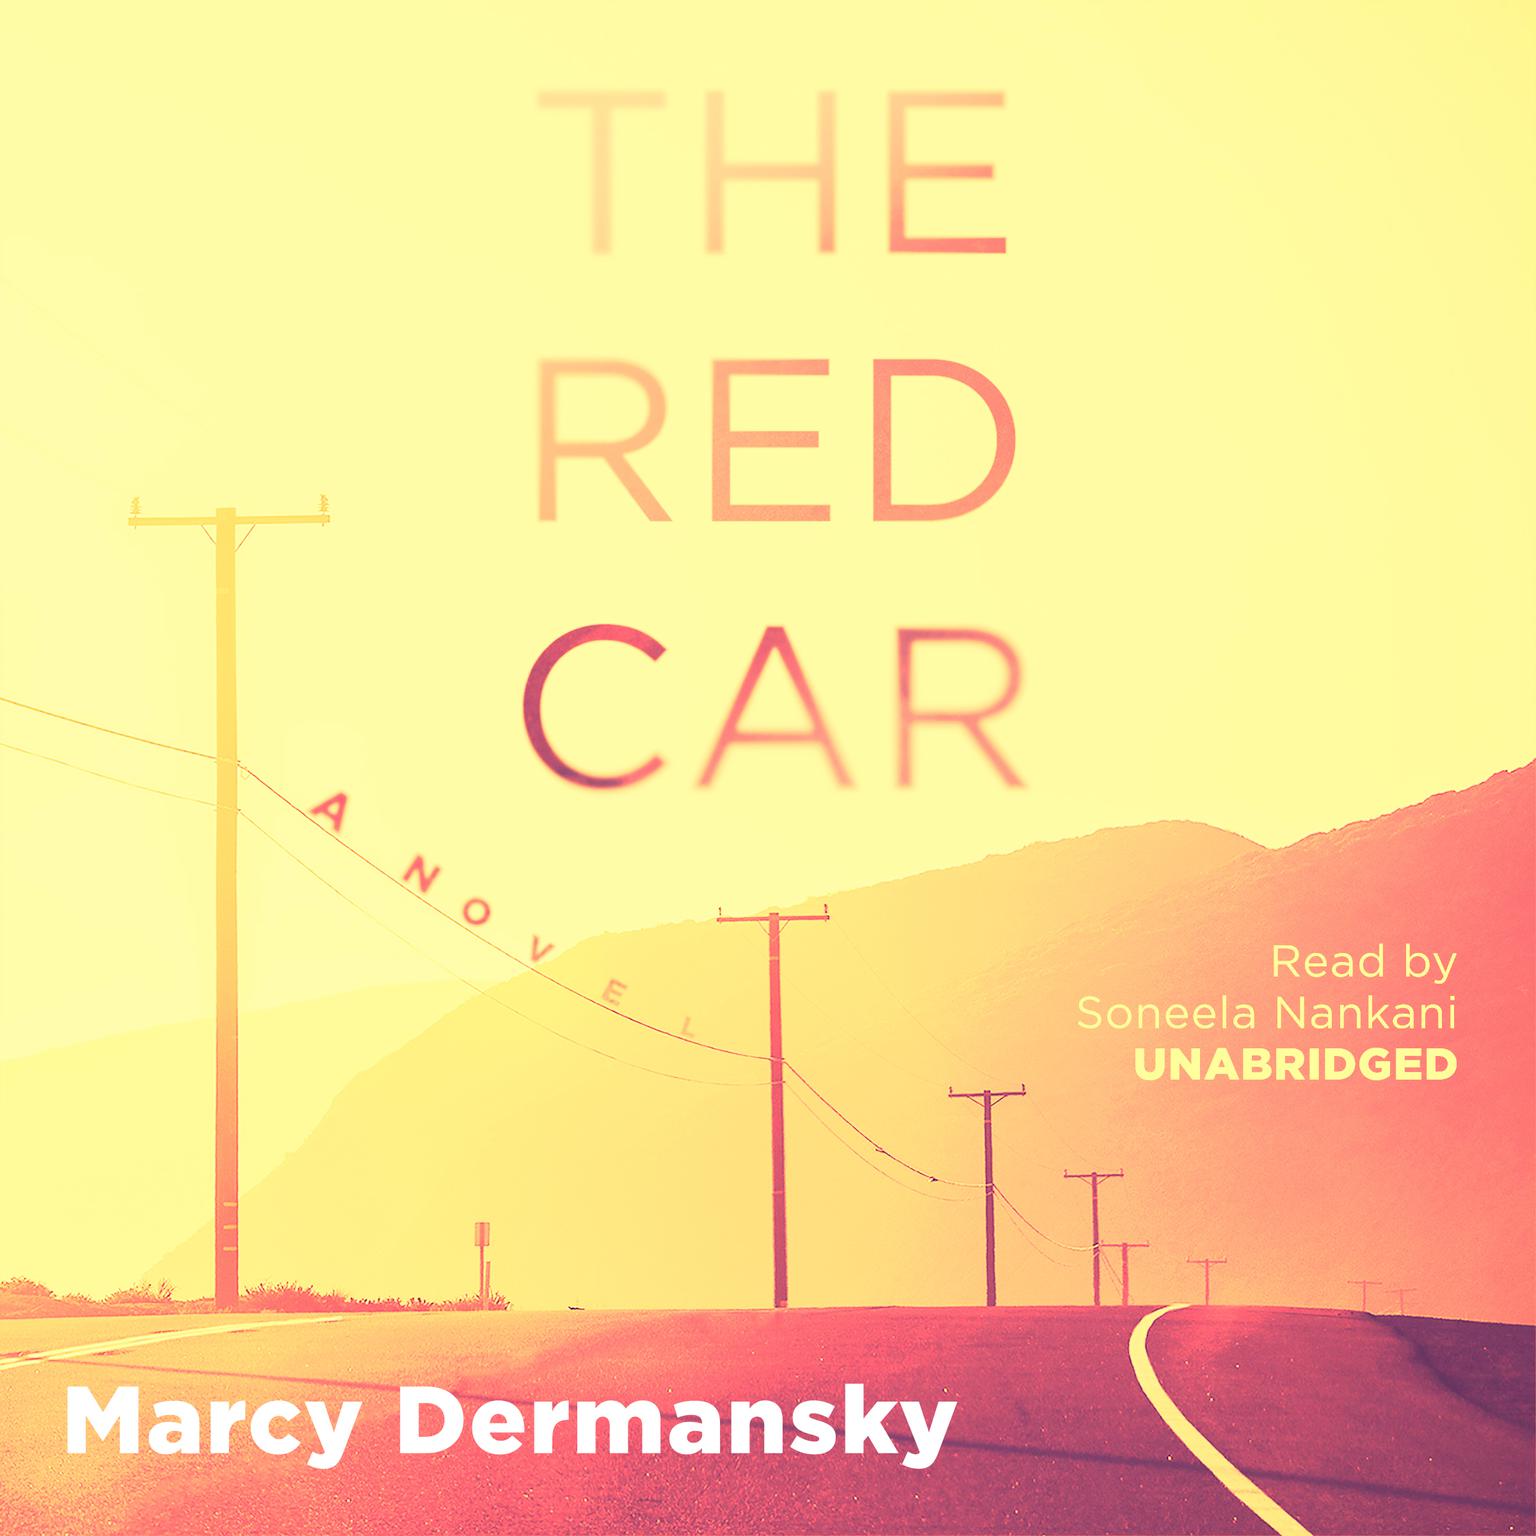 The Red Car: A Novel Audiobook, by Marcy Dermansky